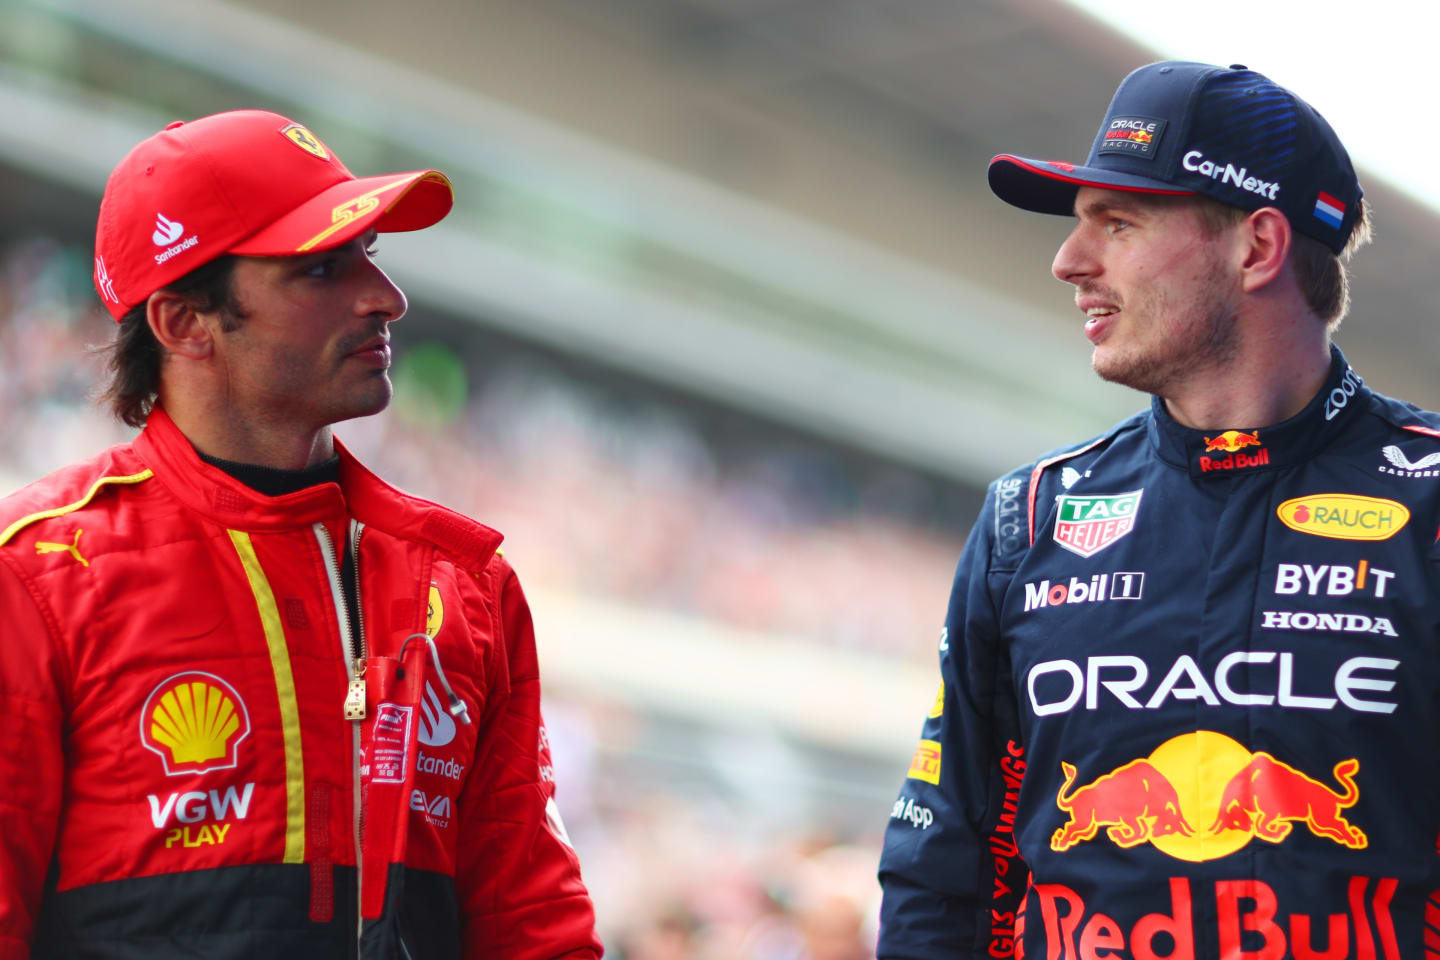 BARCELONA, SPAIN - JUNE 03: Pole position qualifier Max Verstappen of the Netherlands and Oracle Red Bull Racing and Second placed qualifier Carlos Sainz of Spain and Ferrari talk in parc ferme during qualifying ahead of the F1 Grand Prix of Spain at Circuit de Barcelona-Catalunya on June 03, 2023 in Barcelona, Spain. (Photo by Dan Istitene - Formula 1/Formula 1 via Getty Images)